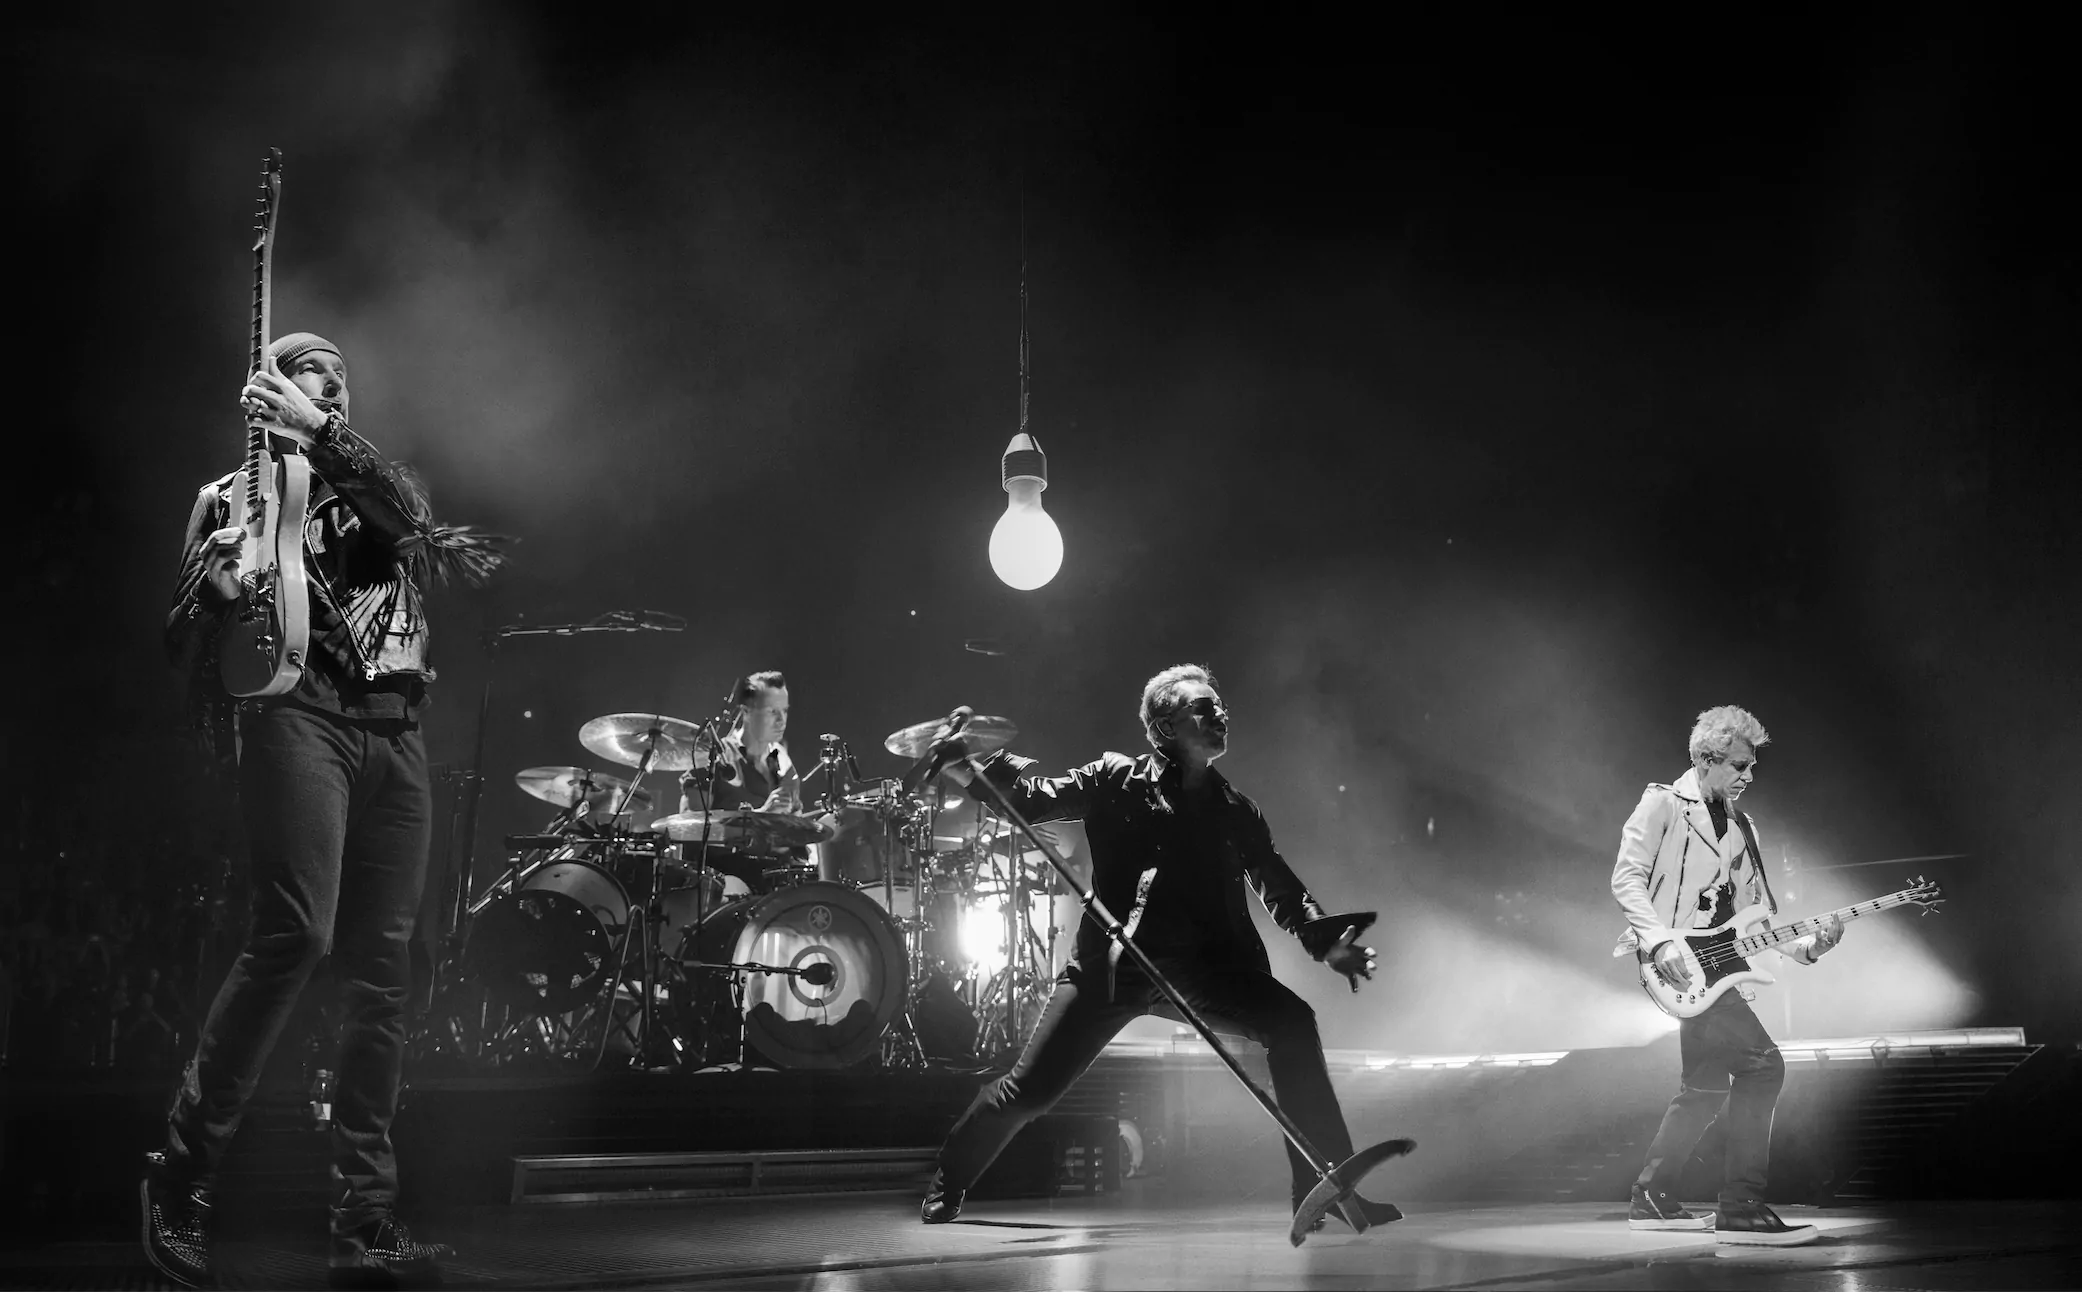 U2 announce ‘U2: The Virtual Road’ – a series of four concerts broadcast for the first time exclusively on the band’s YouTube channel